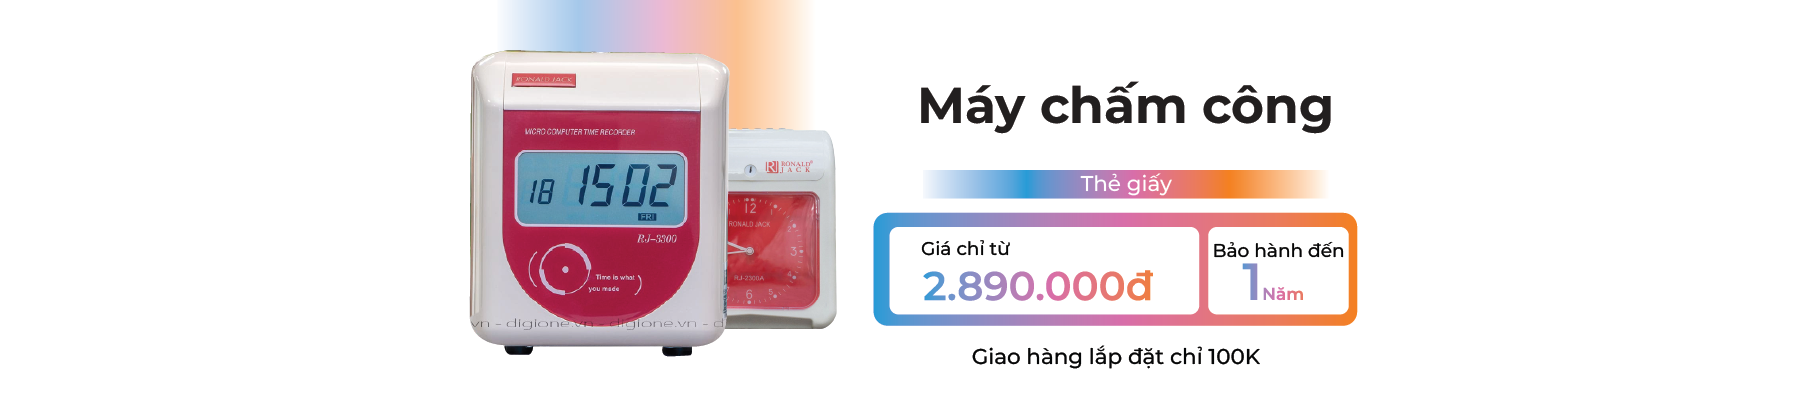 may-cham-cong-the-giay